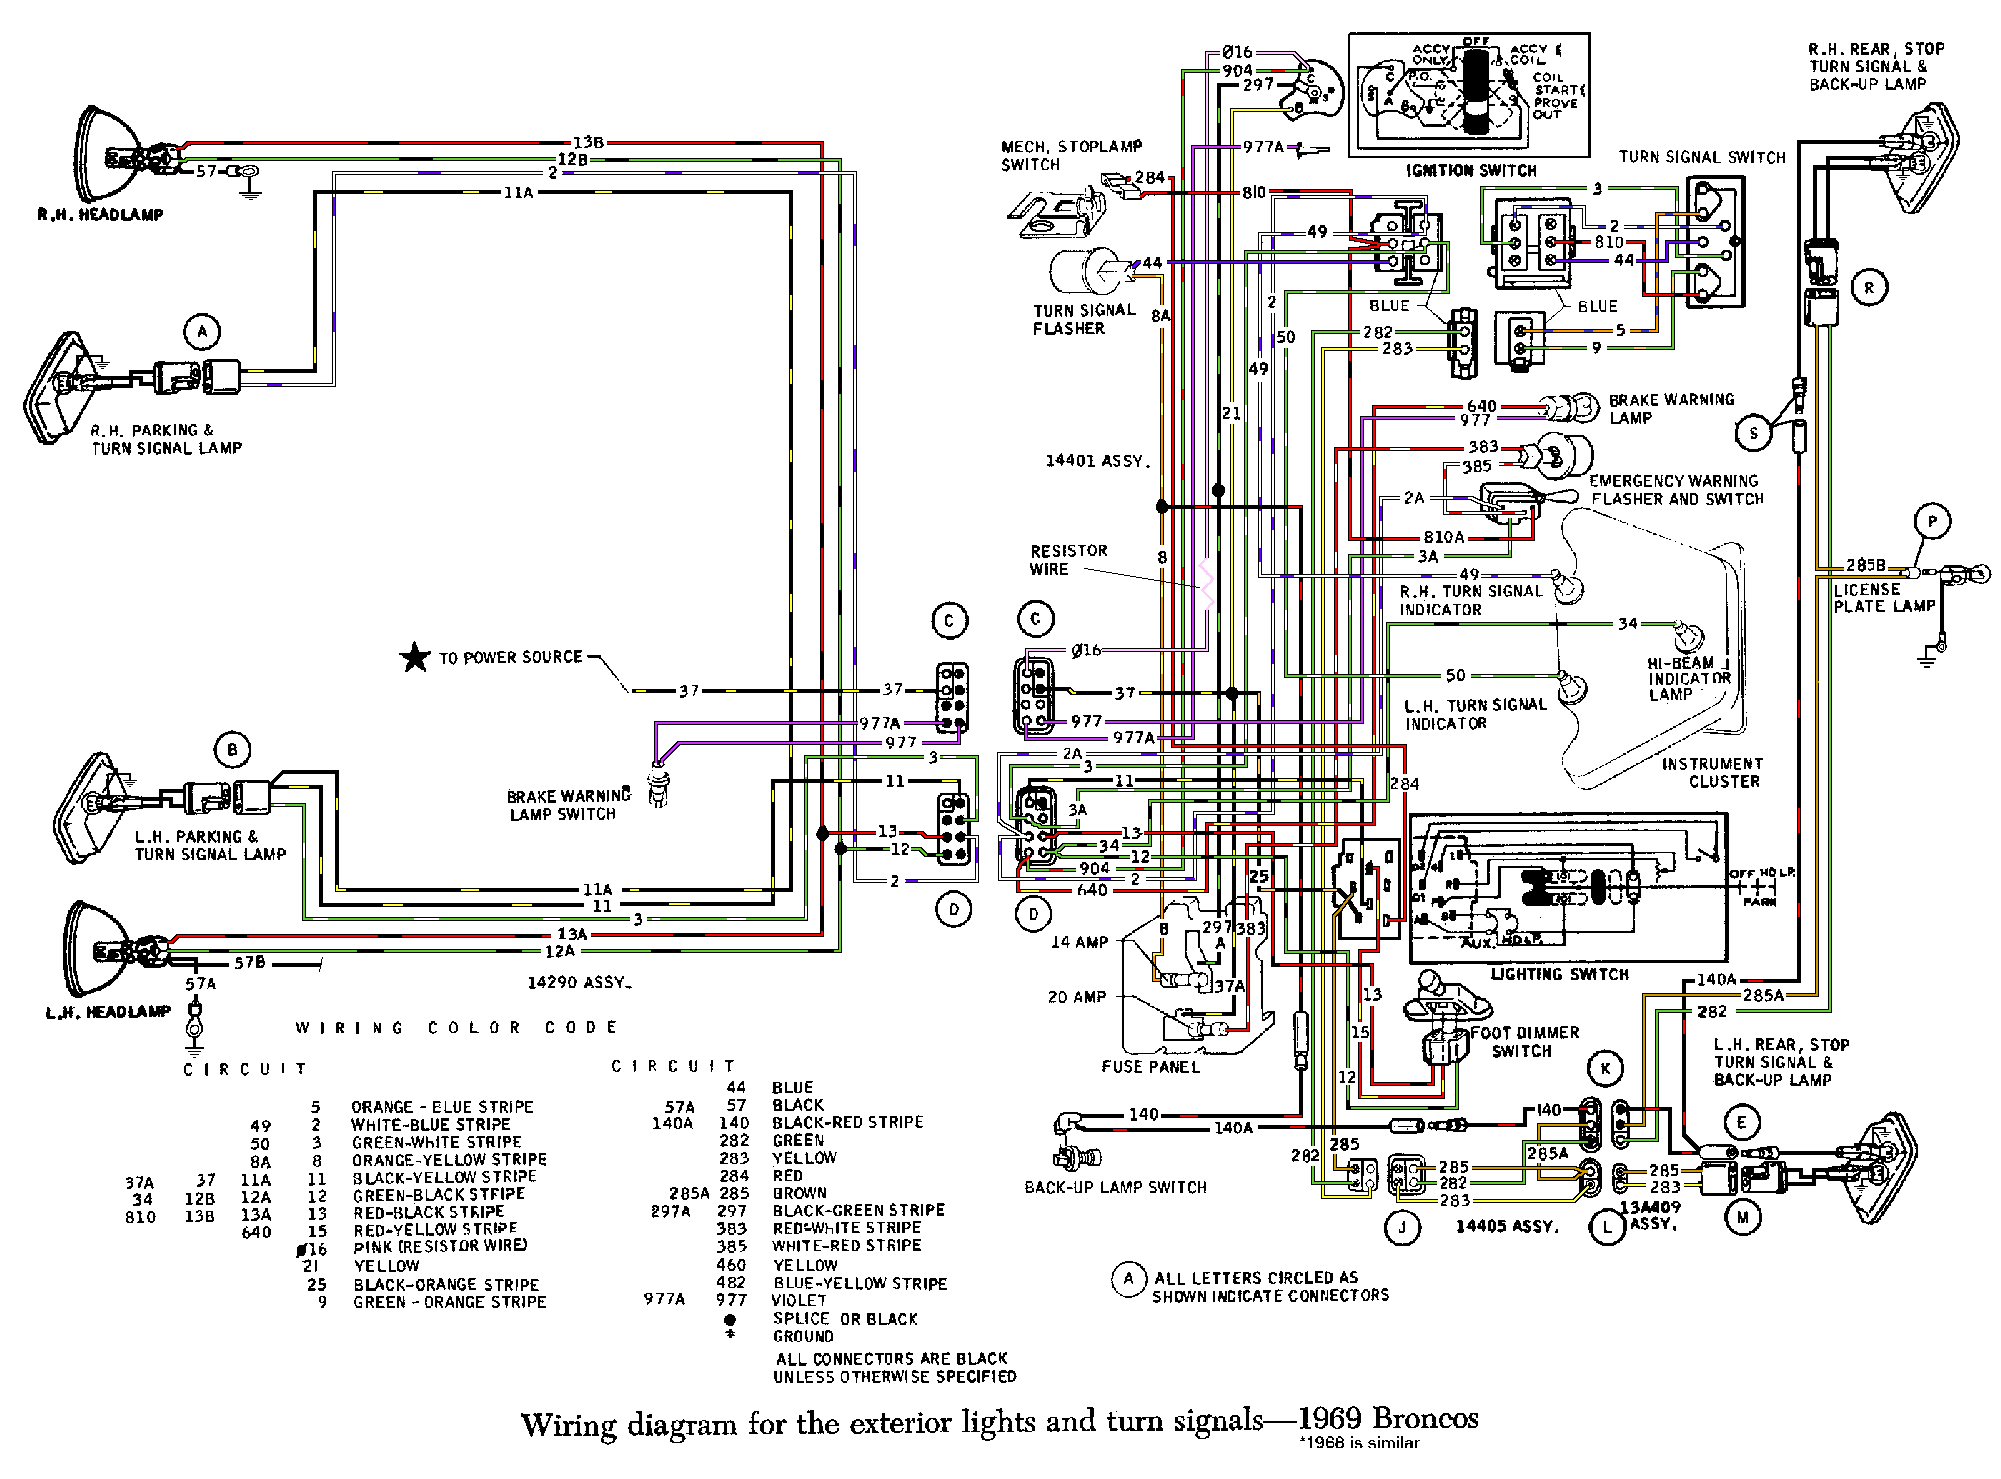 1974 Ford F250 Wiring Diagram from seabiscuit68.tripod.com